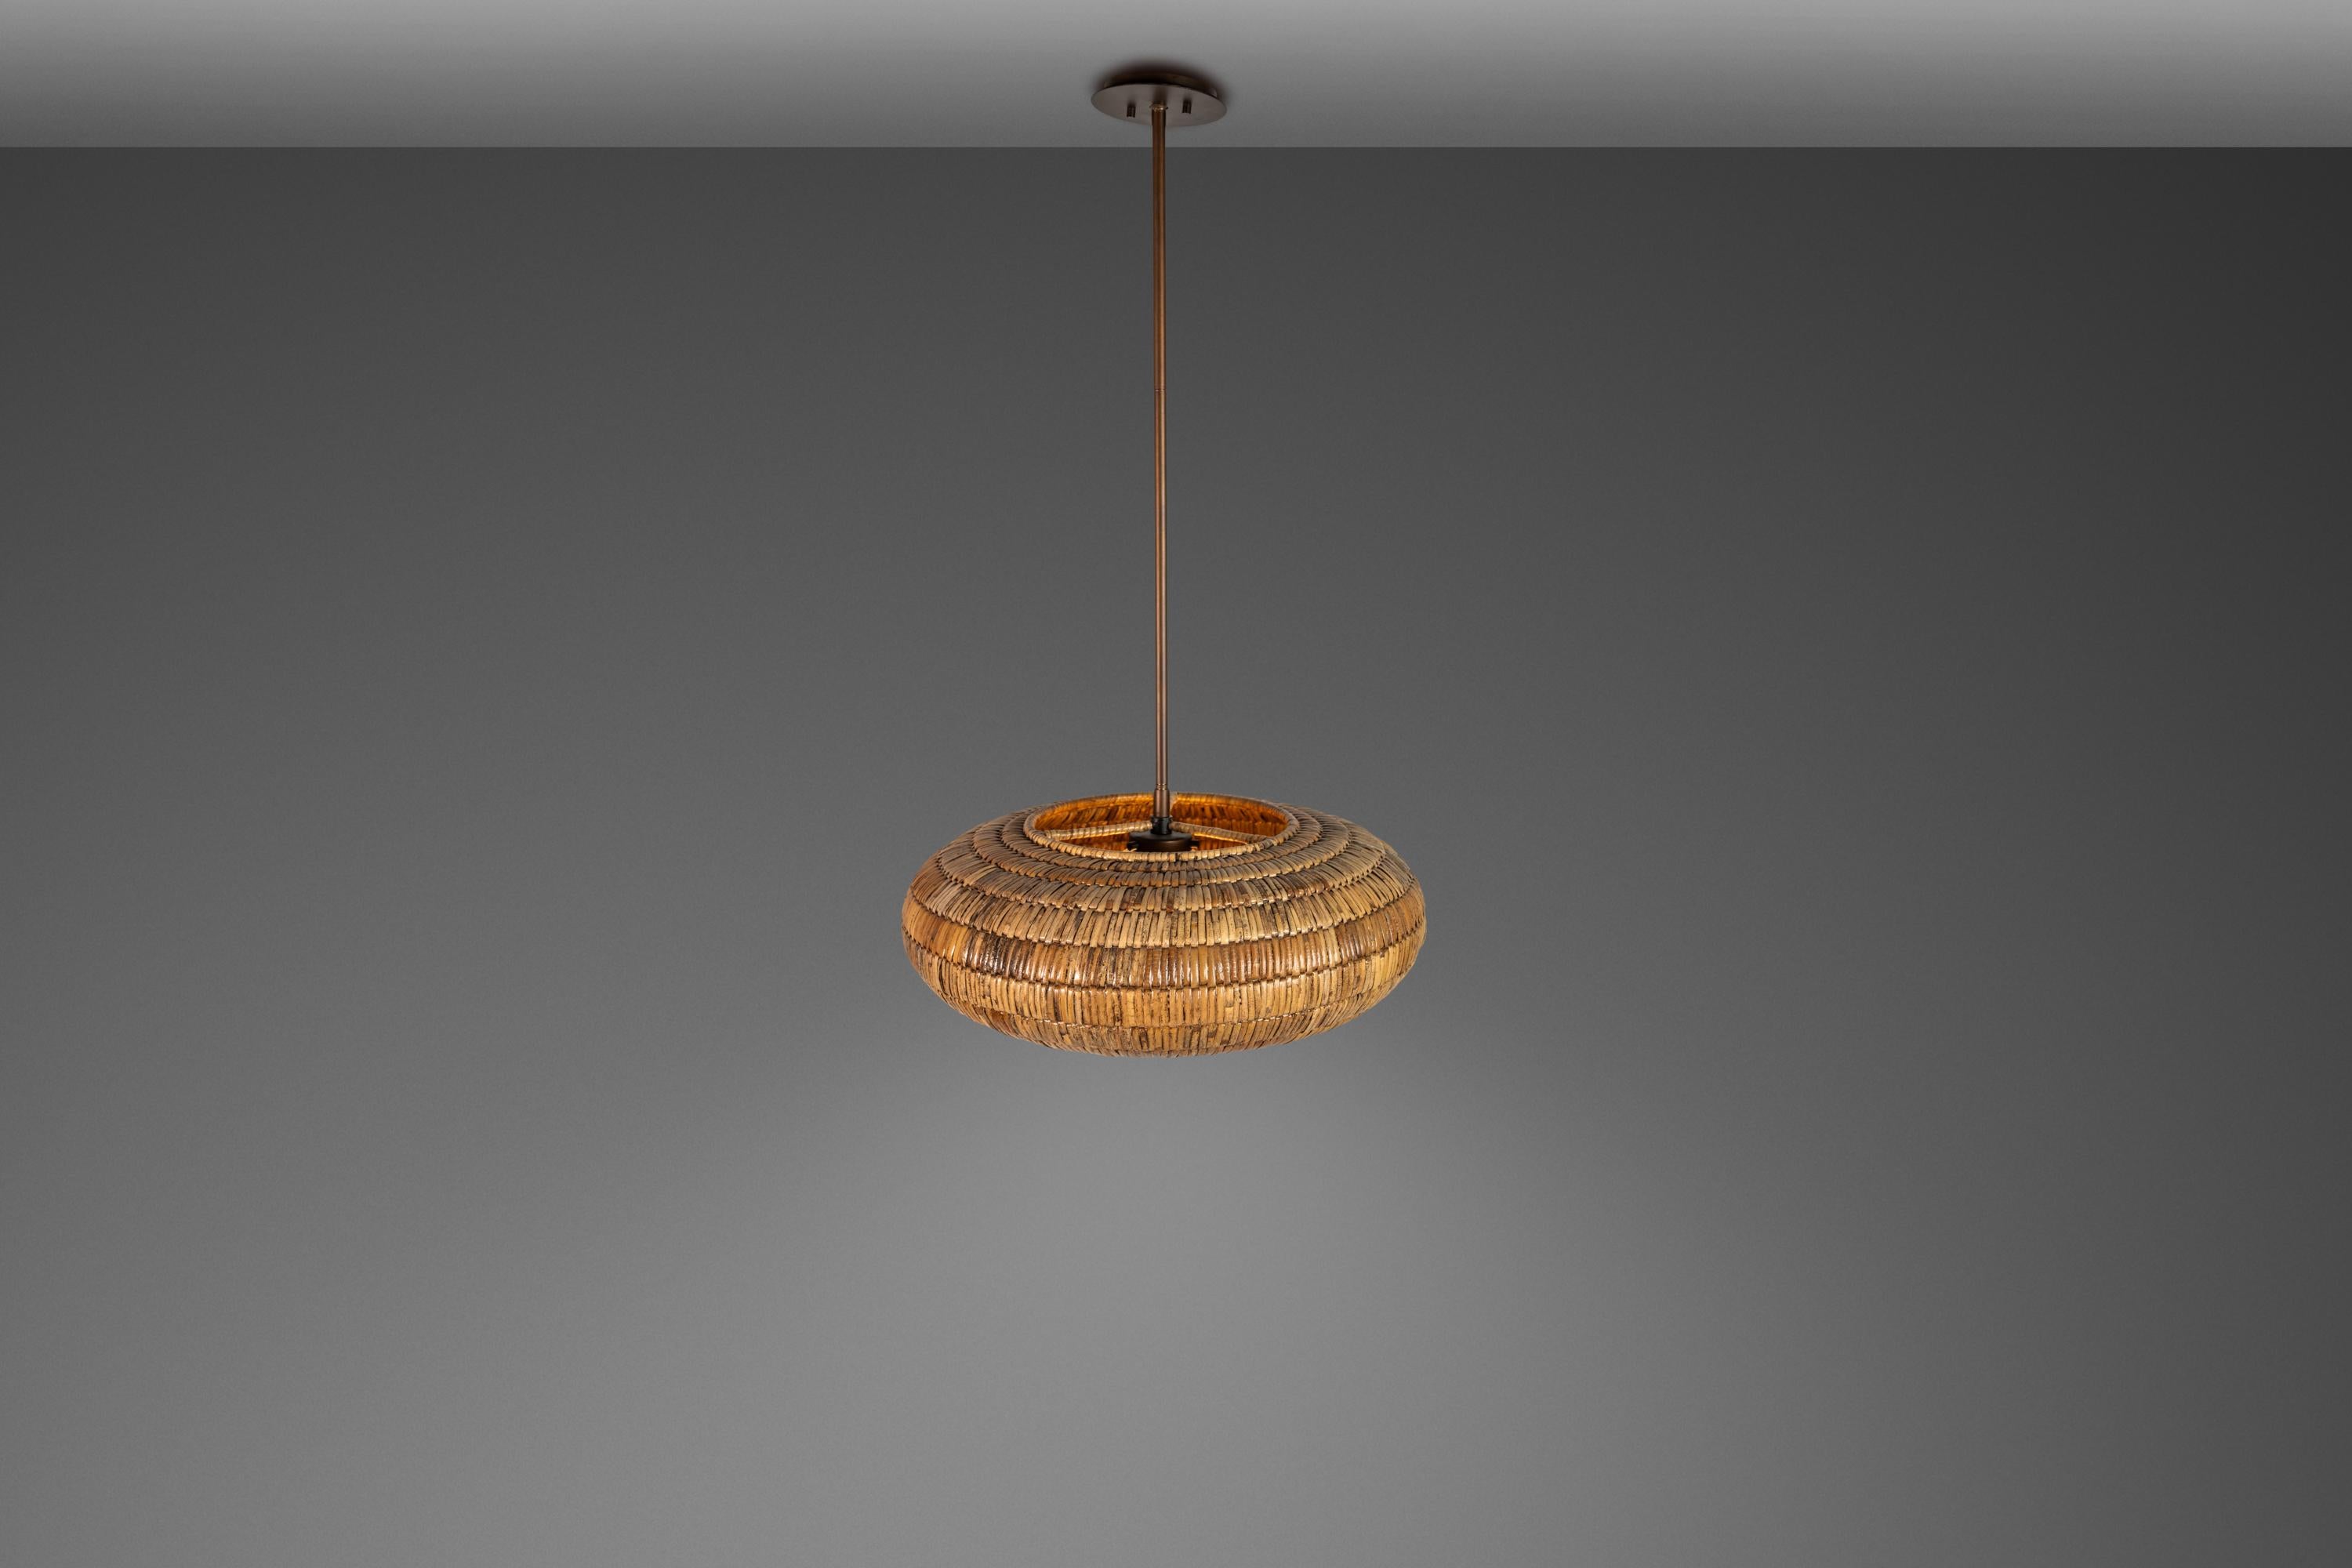 Introducing a rare, limited edition Organic Modern chandelier by the Breuer Collection for Troy Lighting. Featuring a hand-woven donut shape this elegant chandelier is constructed from sustainably-harvested Malacca palm strands that add a perfect